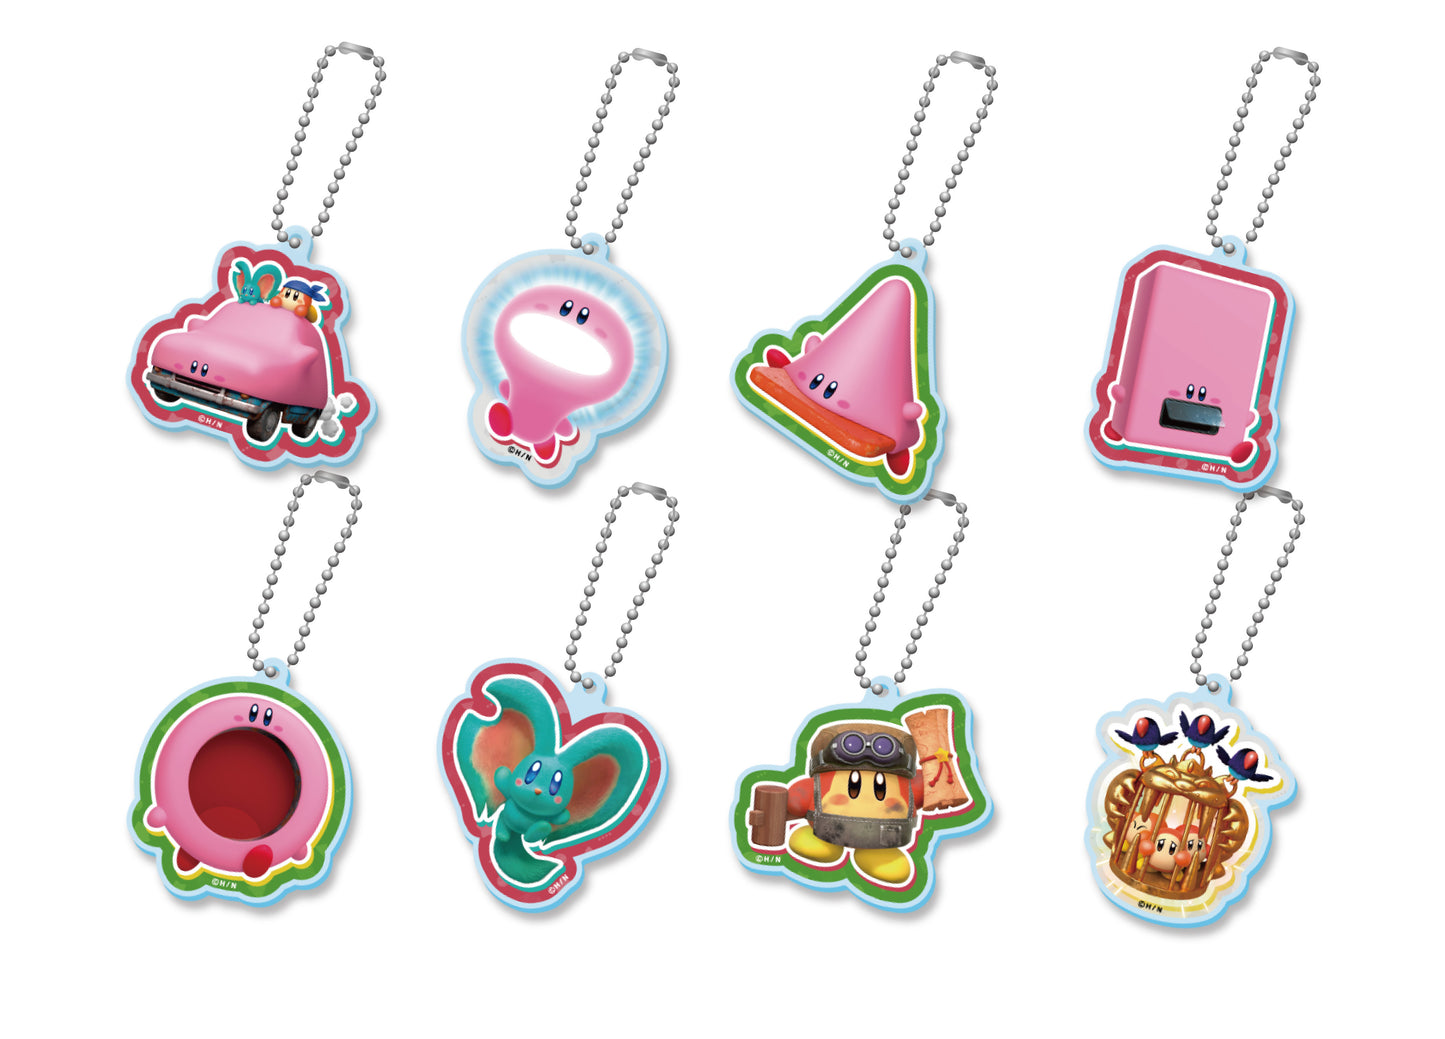 Kirby and the Forgotten Land" Acrylic Key Chain Collection